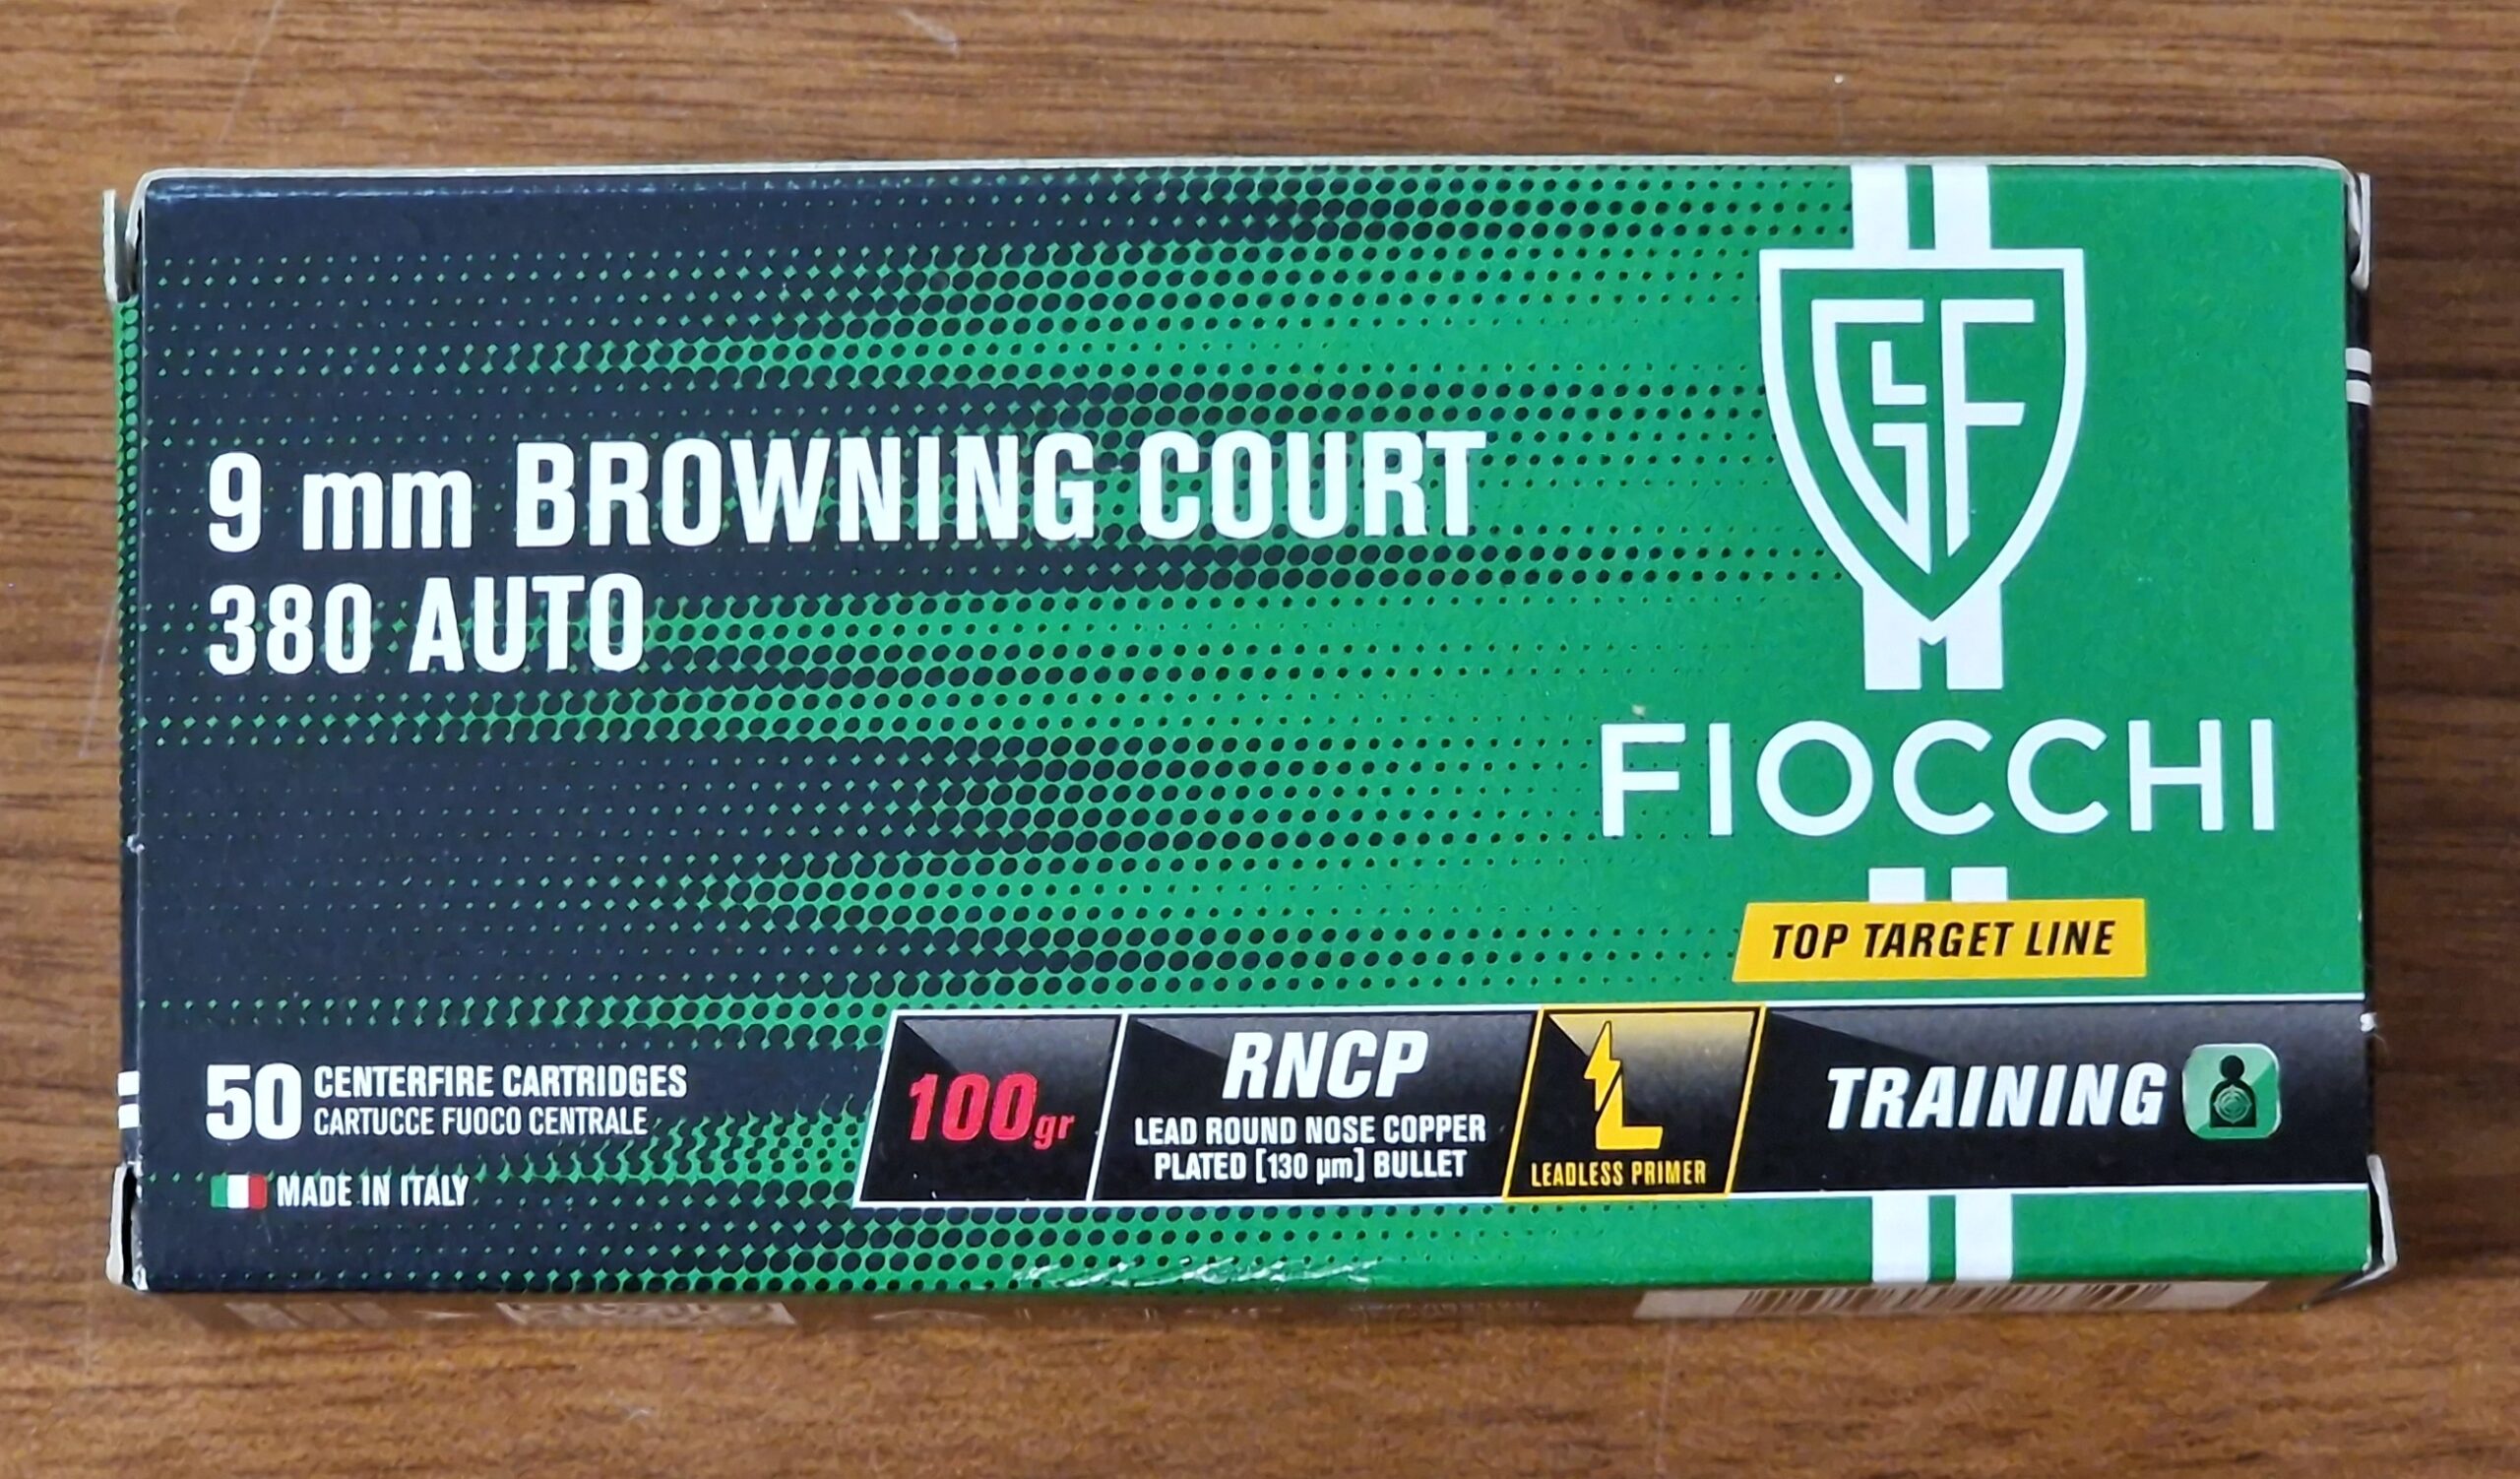 Fiocchi 9mm browning court training - 380 auto-image